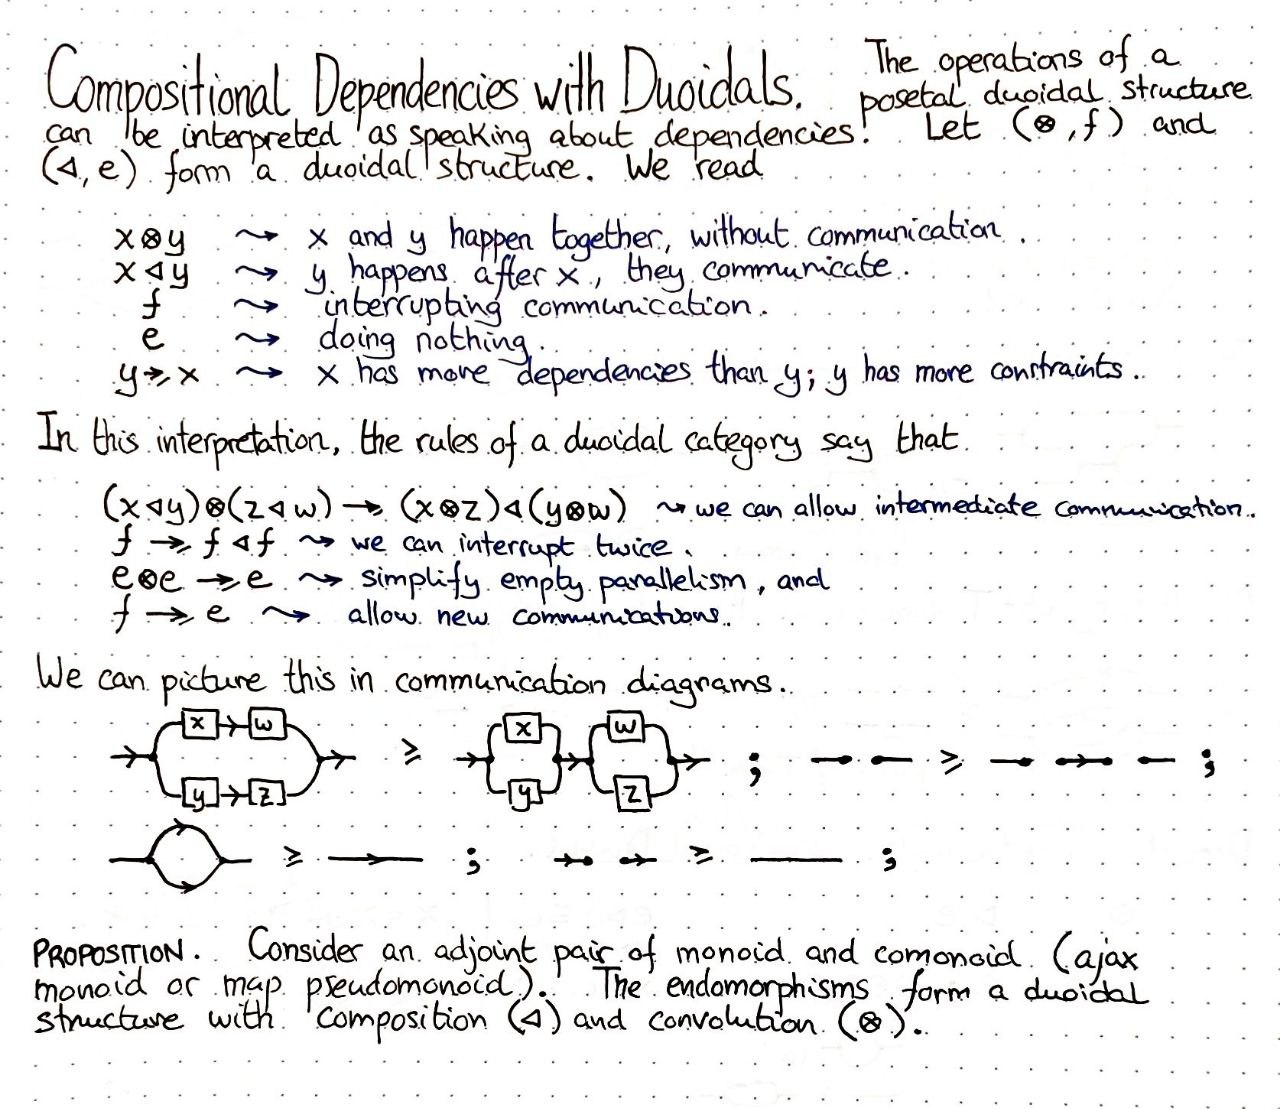 compositional-dependencies-with-duoidals